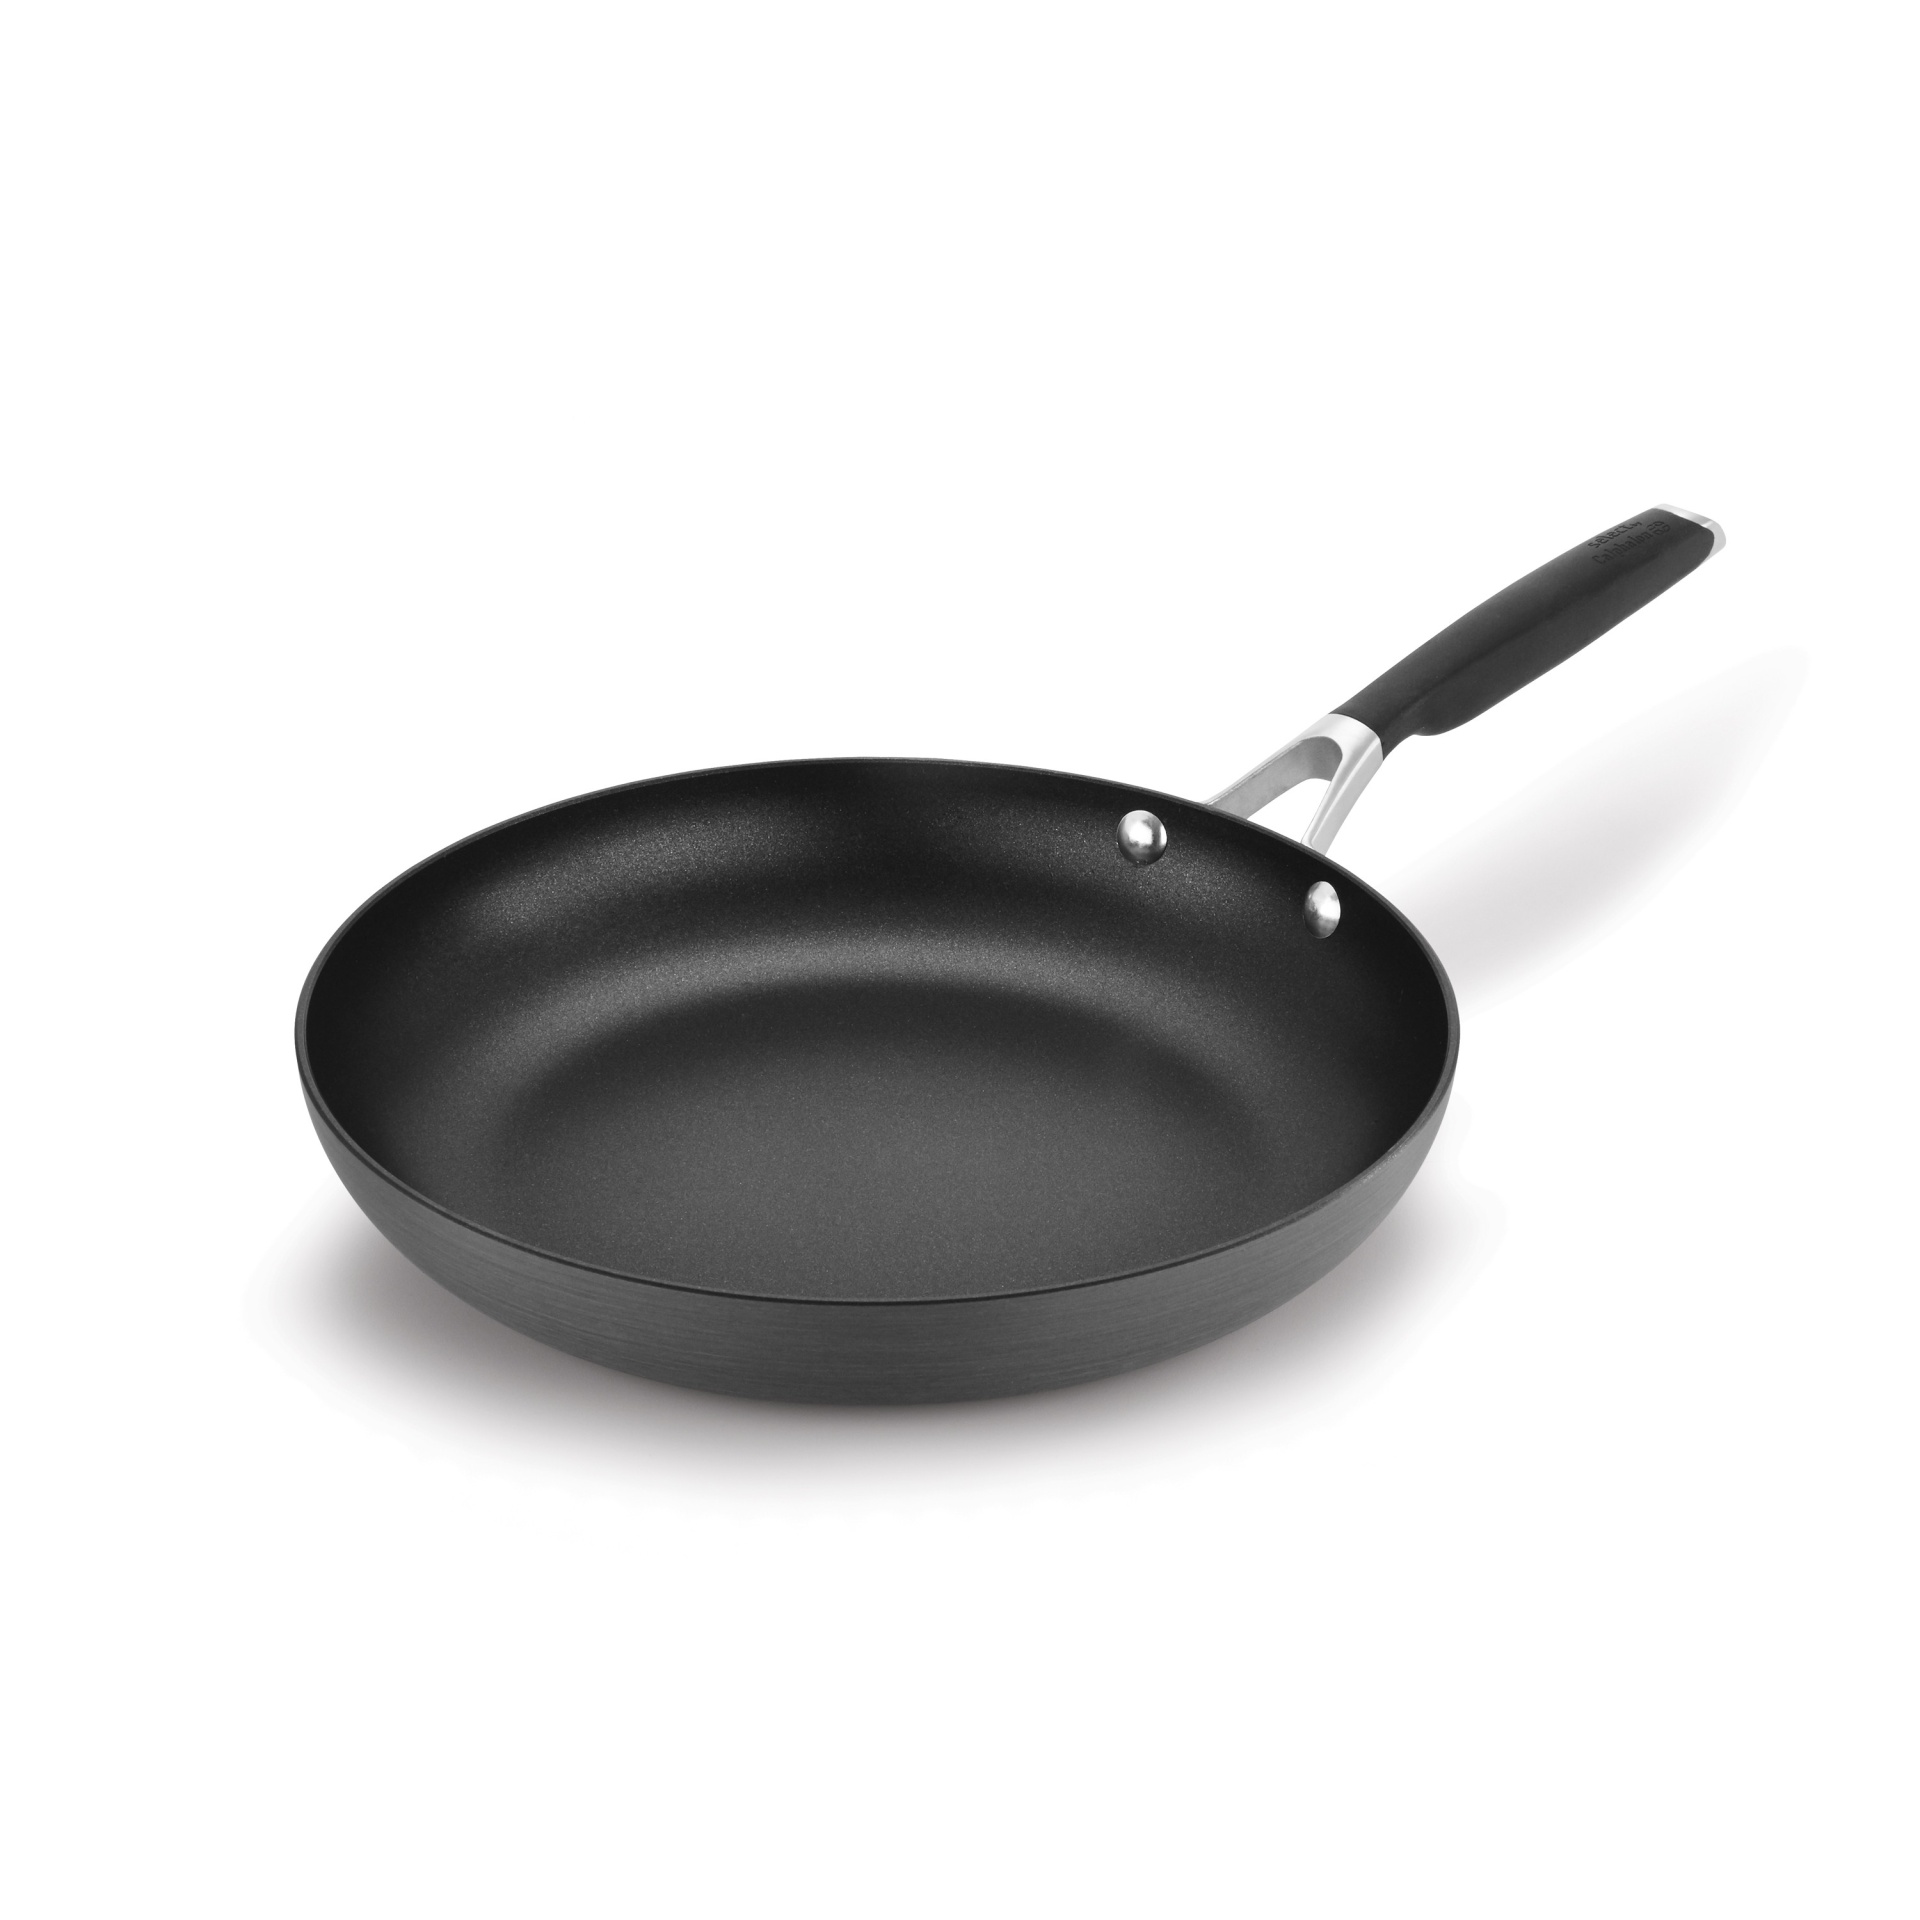 Calphalon Select Nonstick 12-Inch Frying Pan with Lid